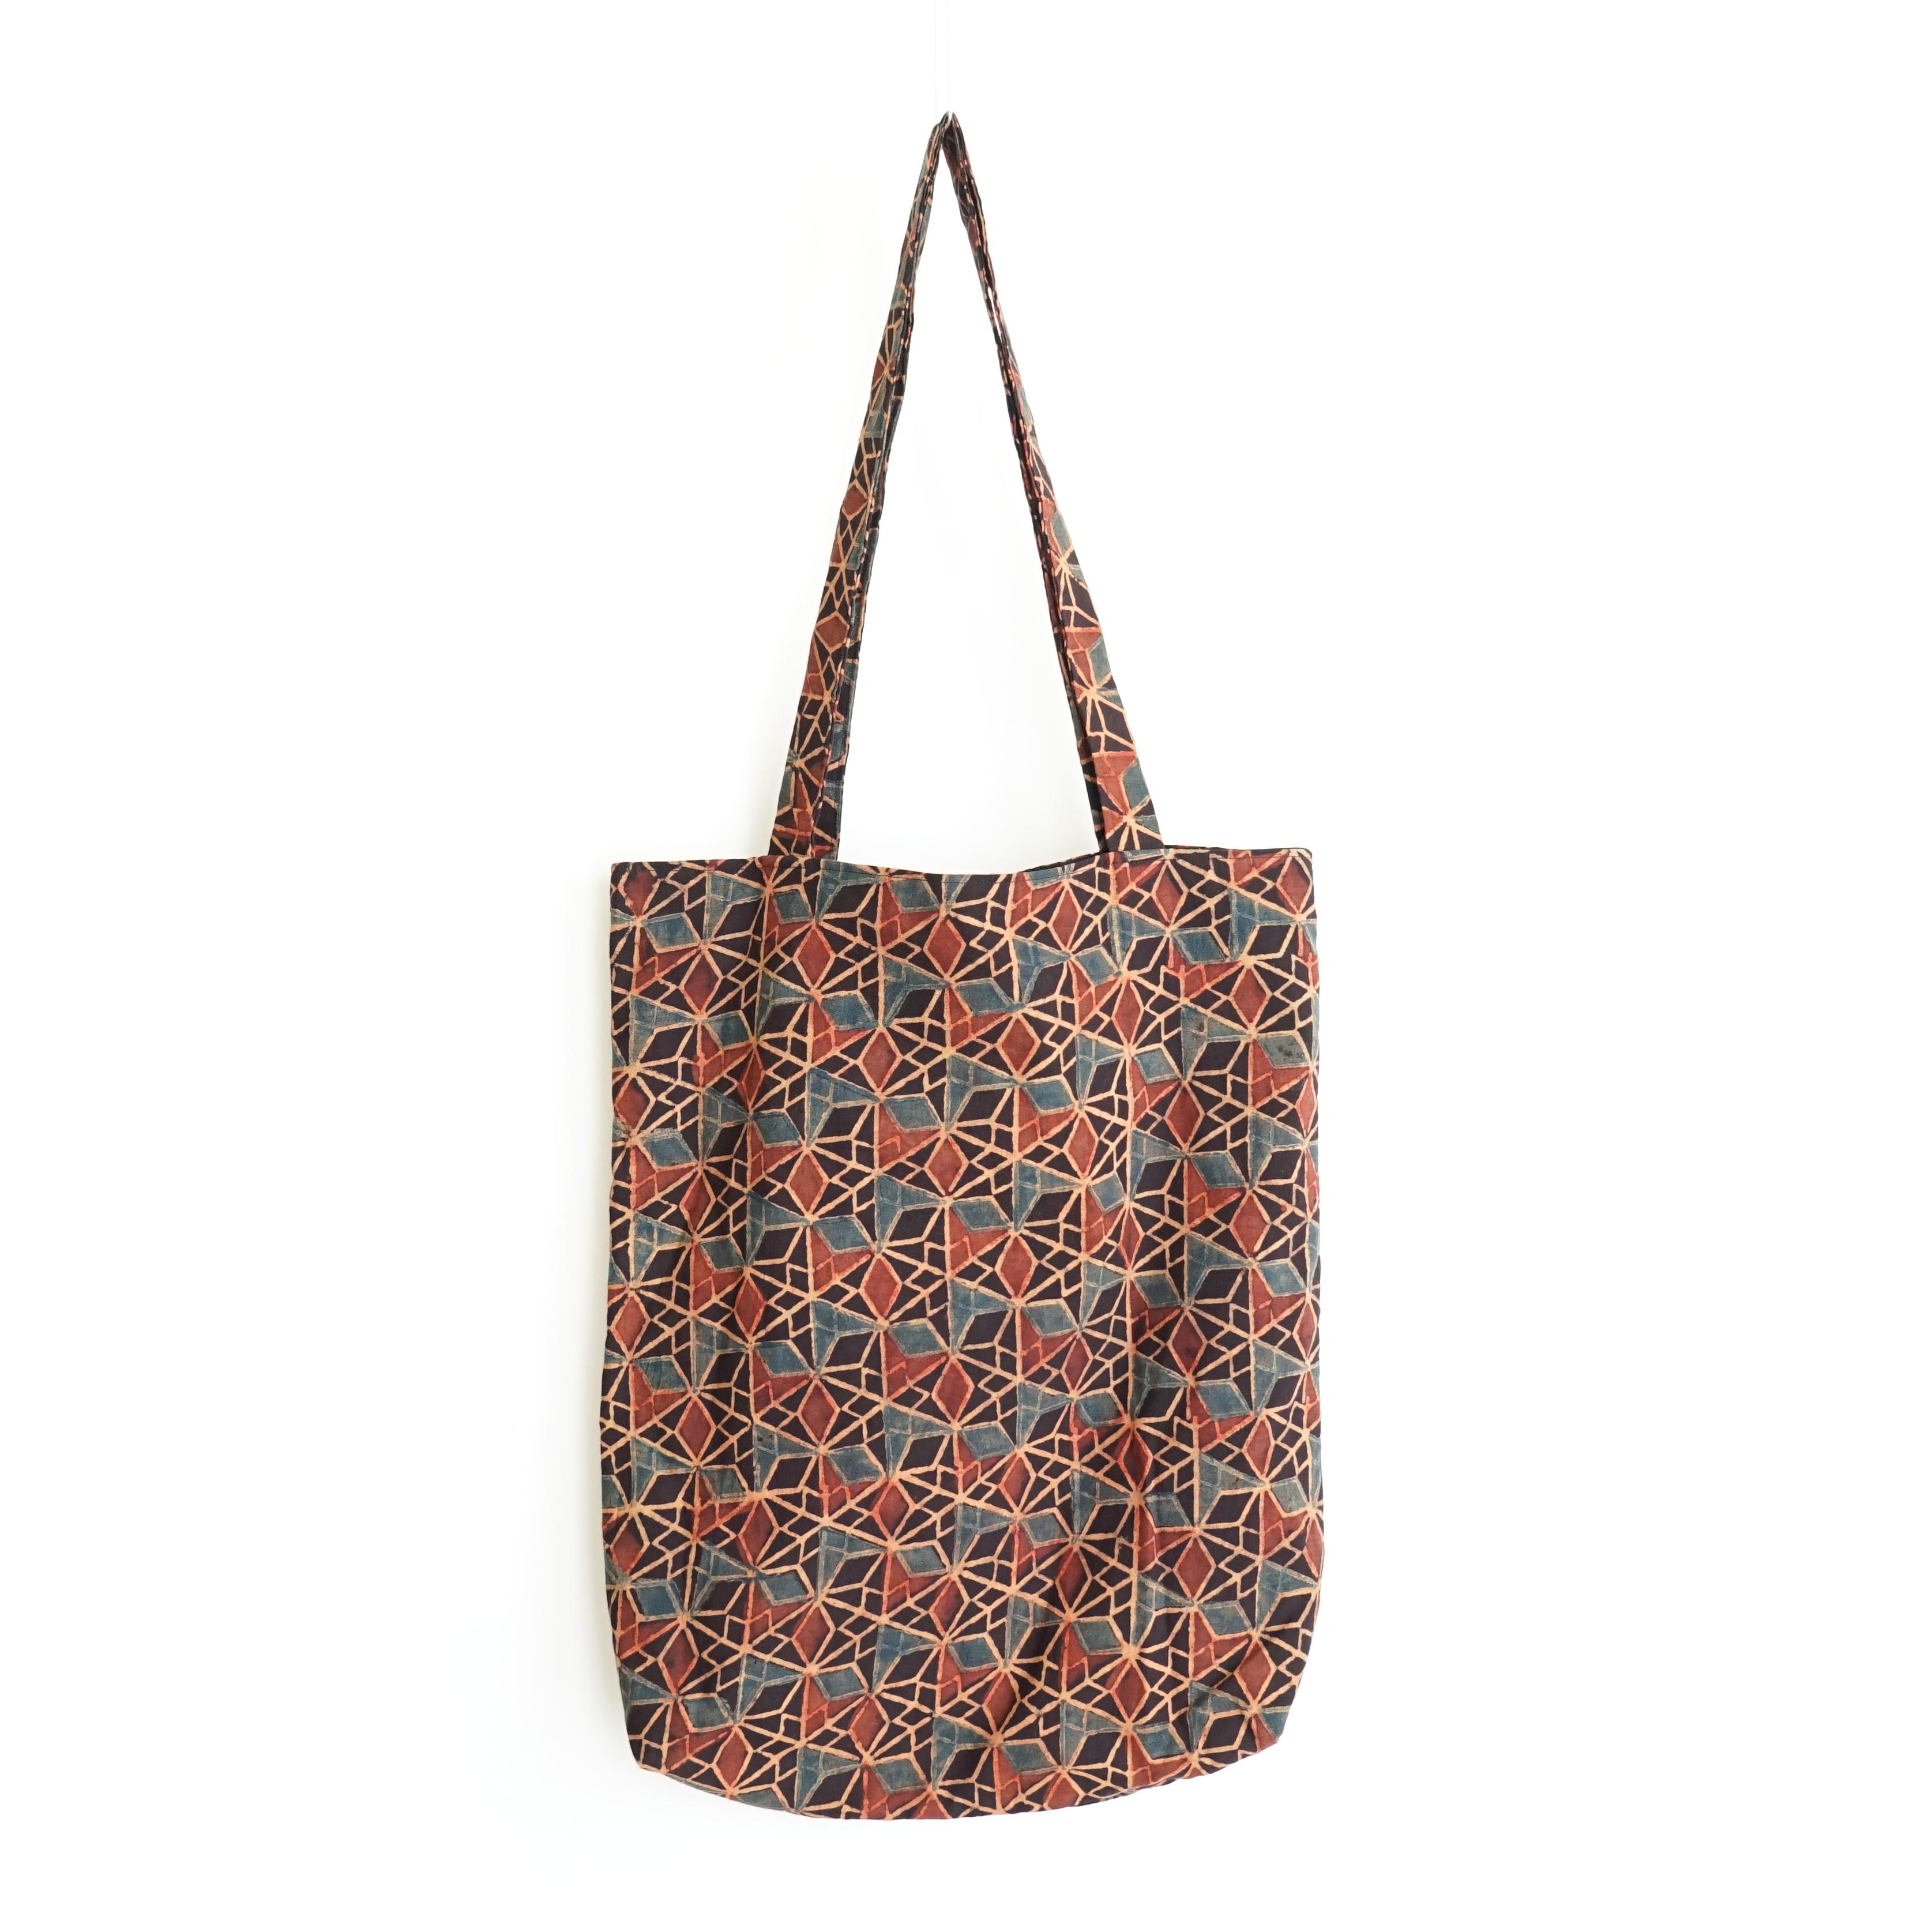 block printed cotton tote bag, black, red ochre blue wing design, natural dye, lined with black cotton, closed